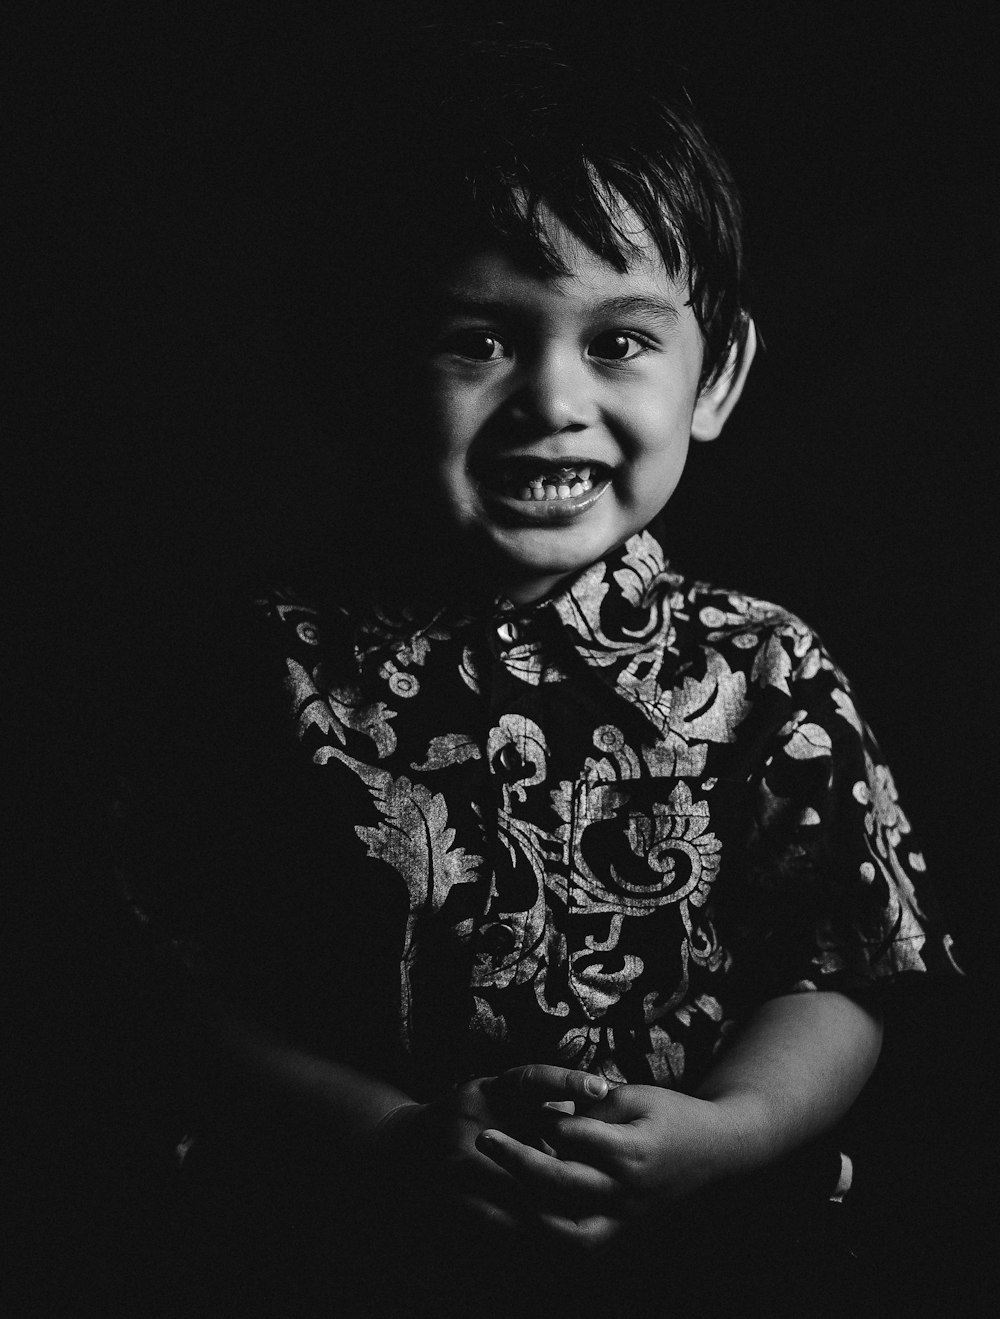 grayscale photo of smiling boy